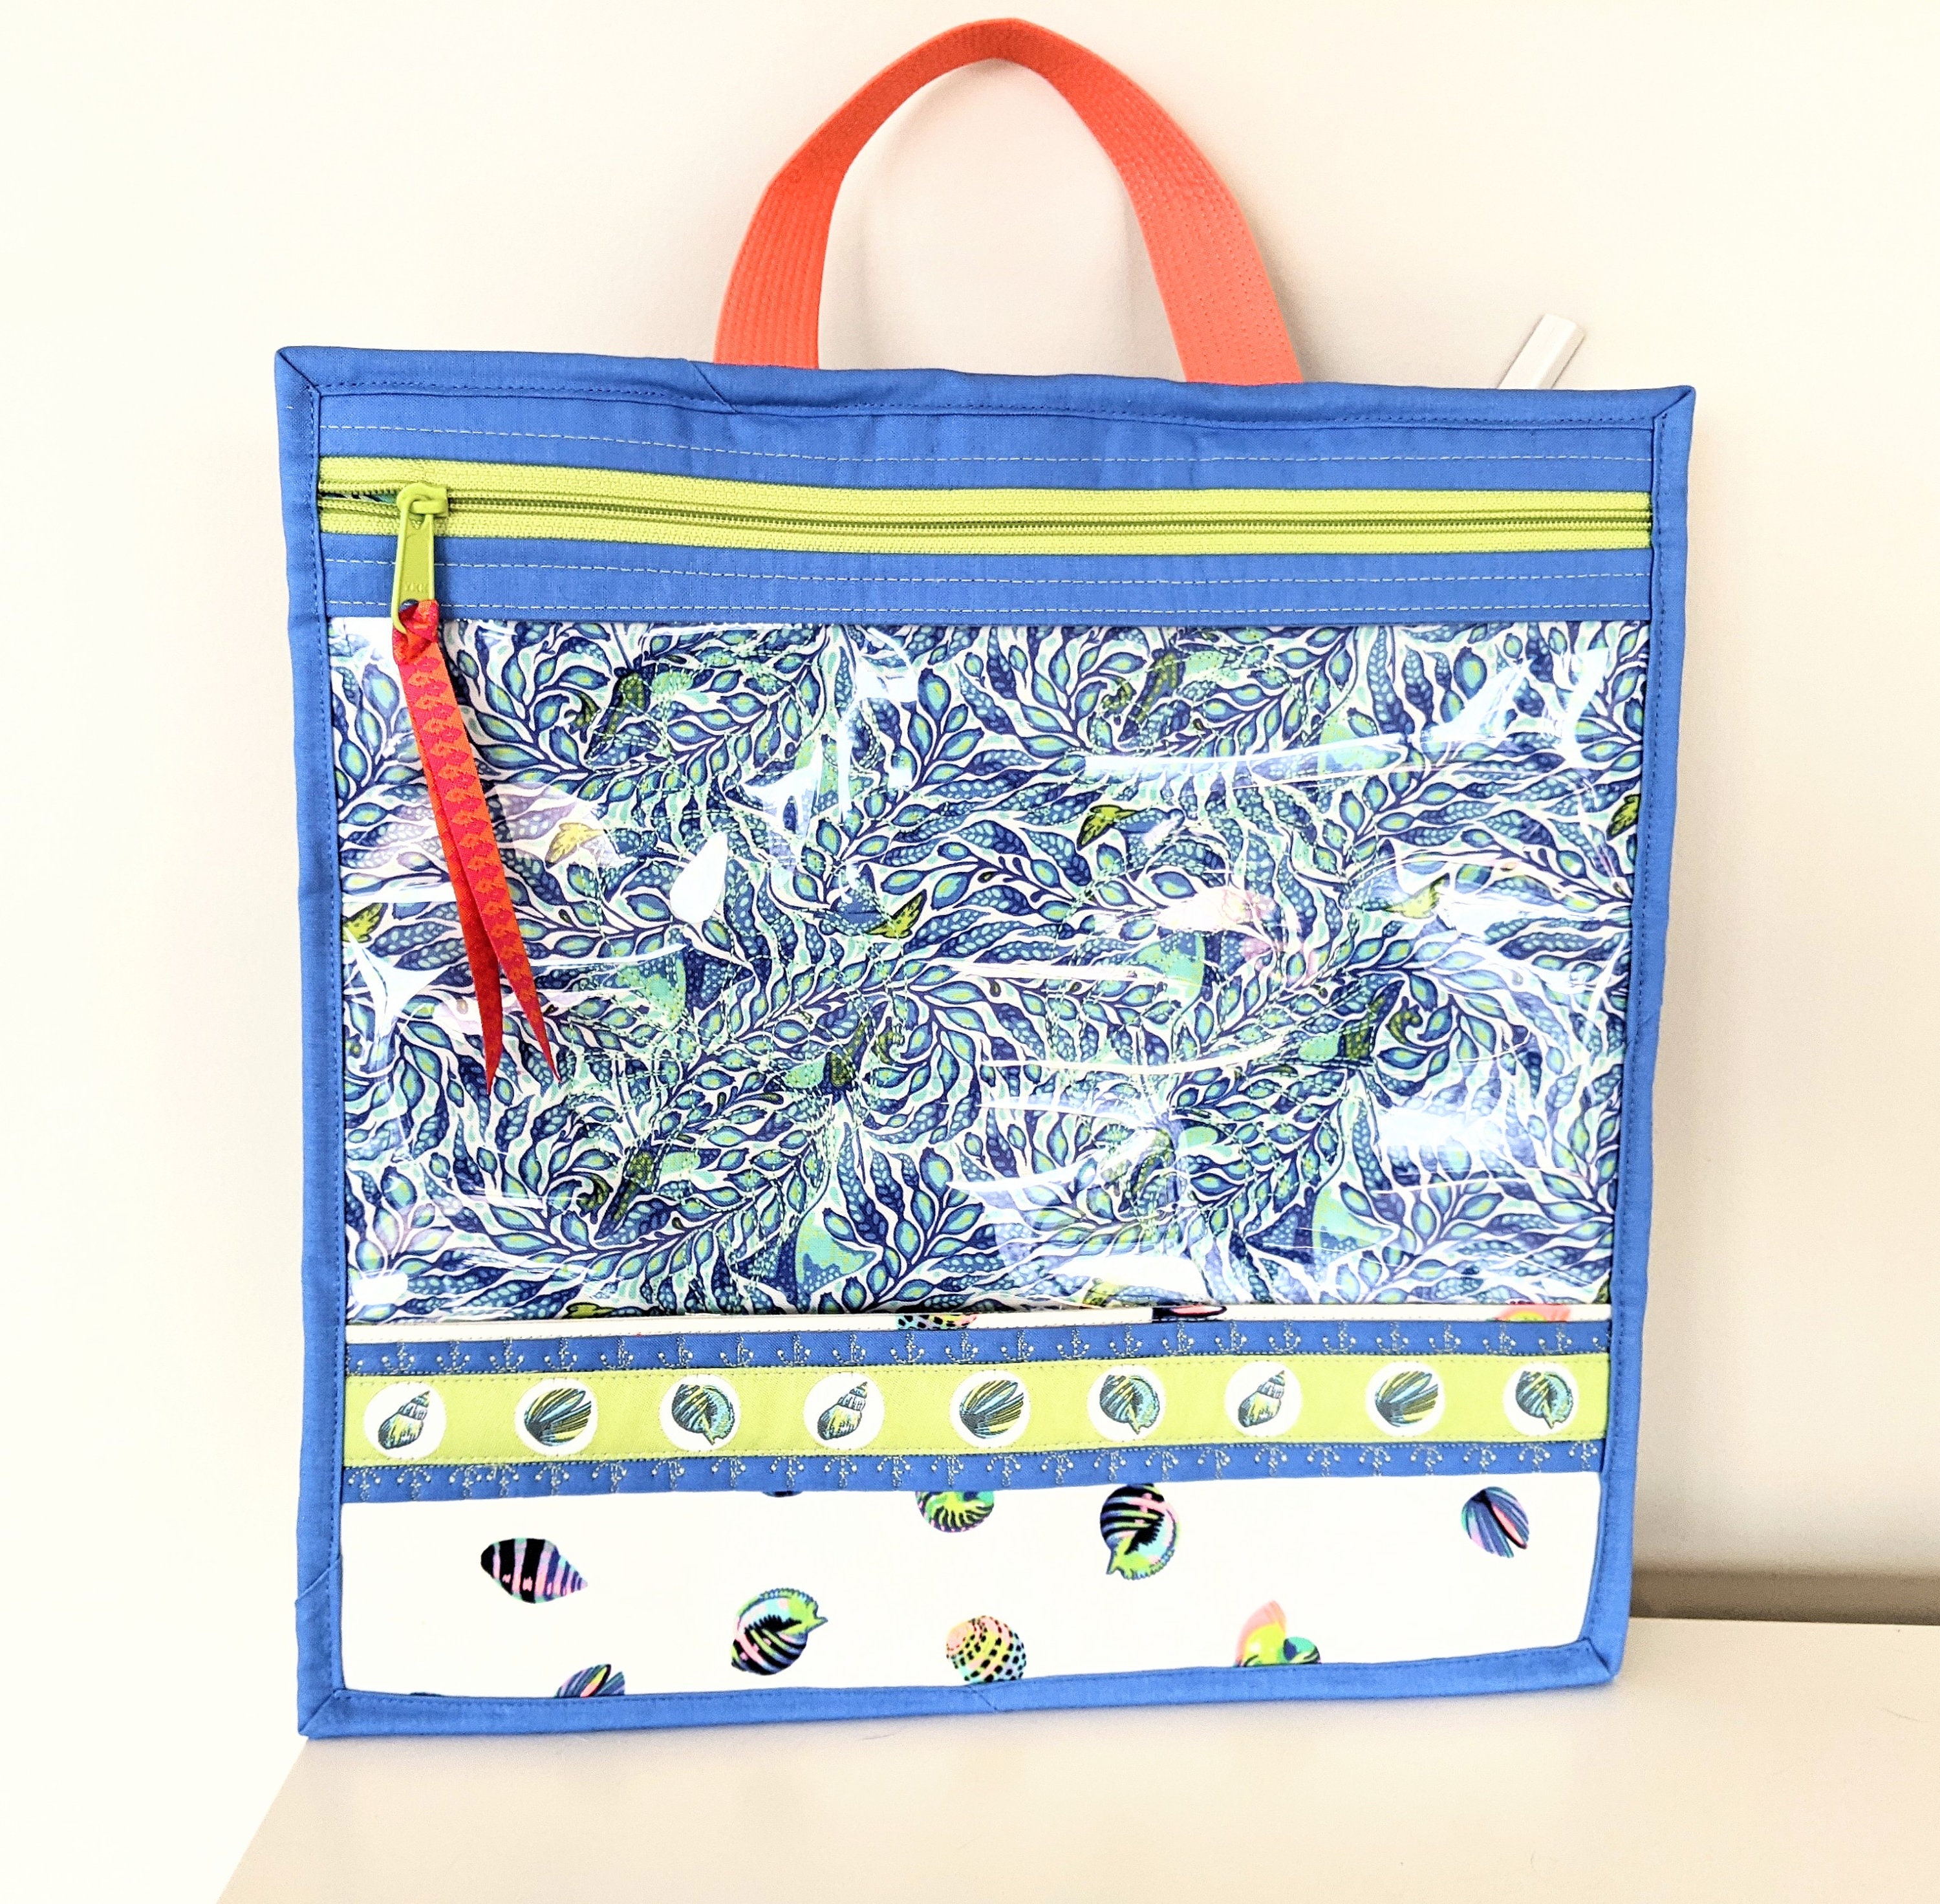  Annie Project Bags 2.0 Pattern : Arts, Crafts & Sewing